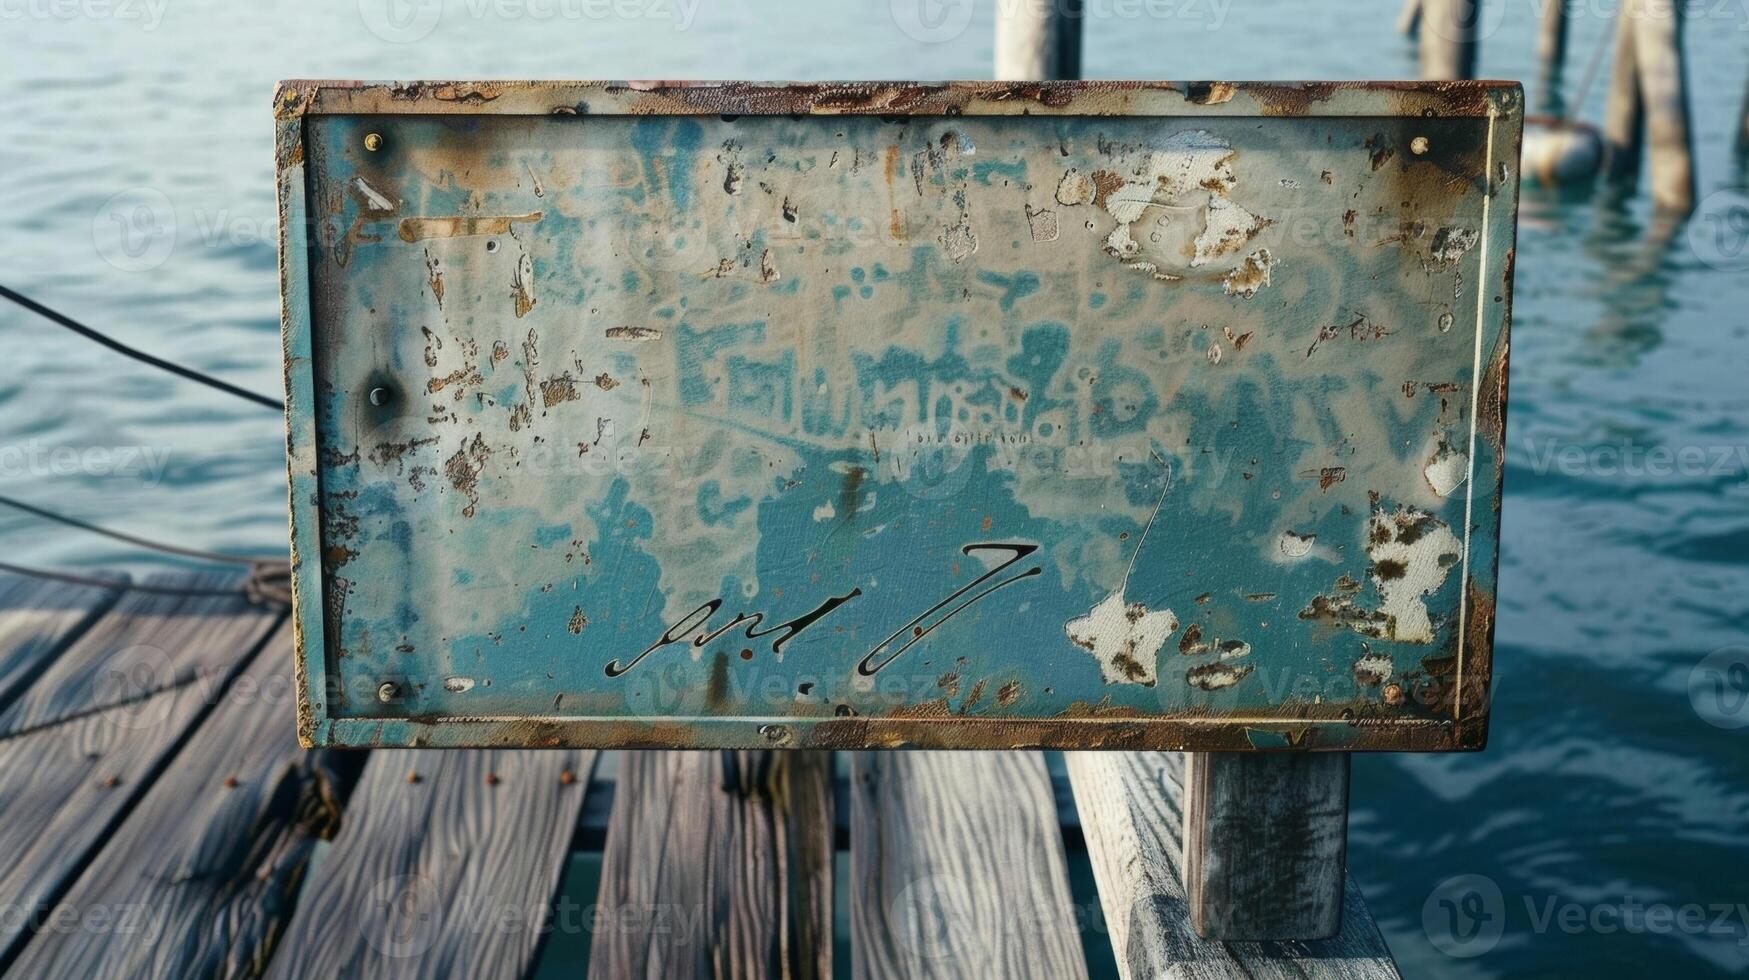 Blank mockup of a weathered metal dock sign with raised lettering. photo